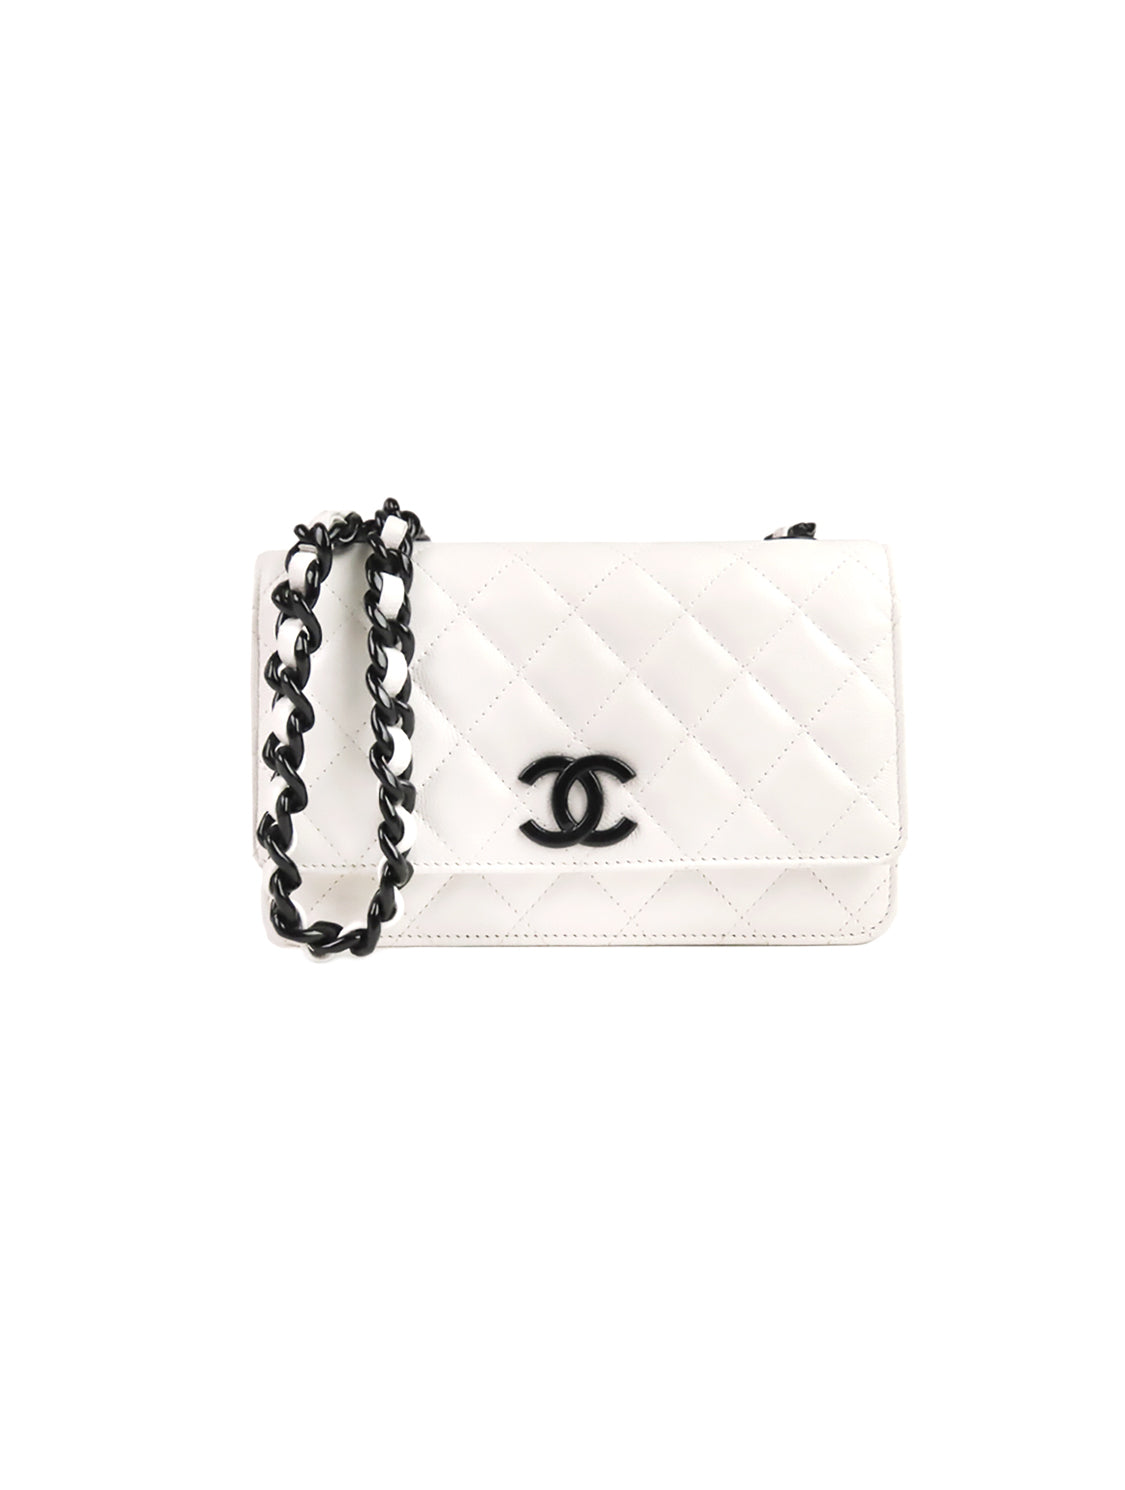 Black And White Chanel Bag